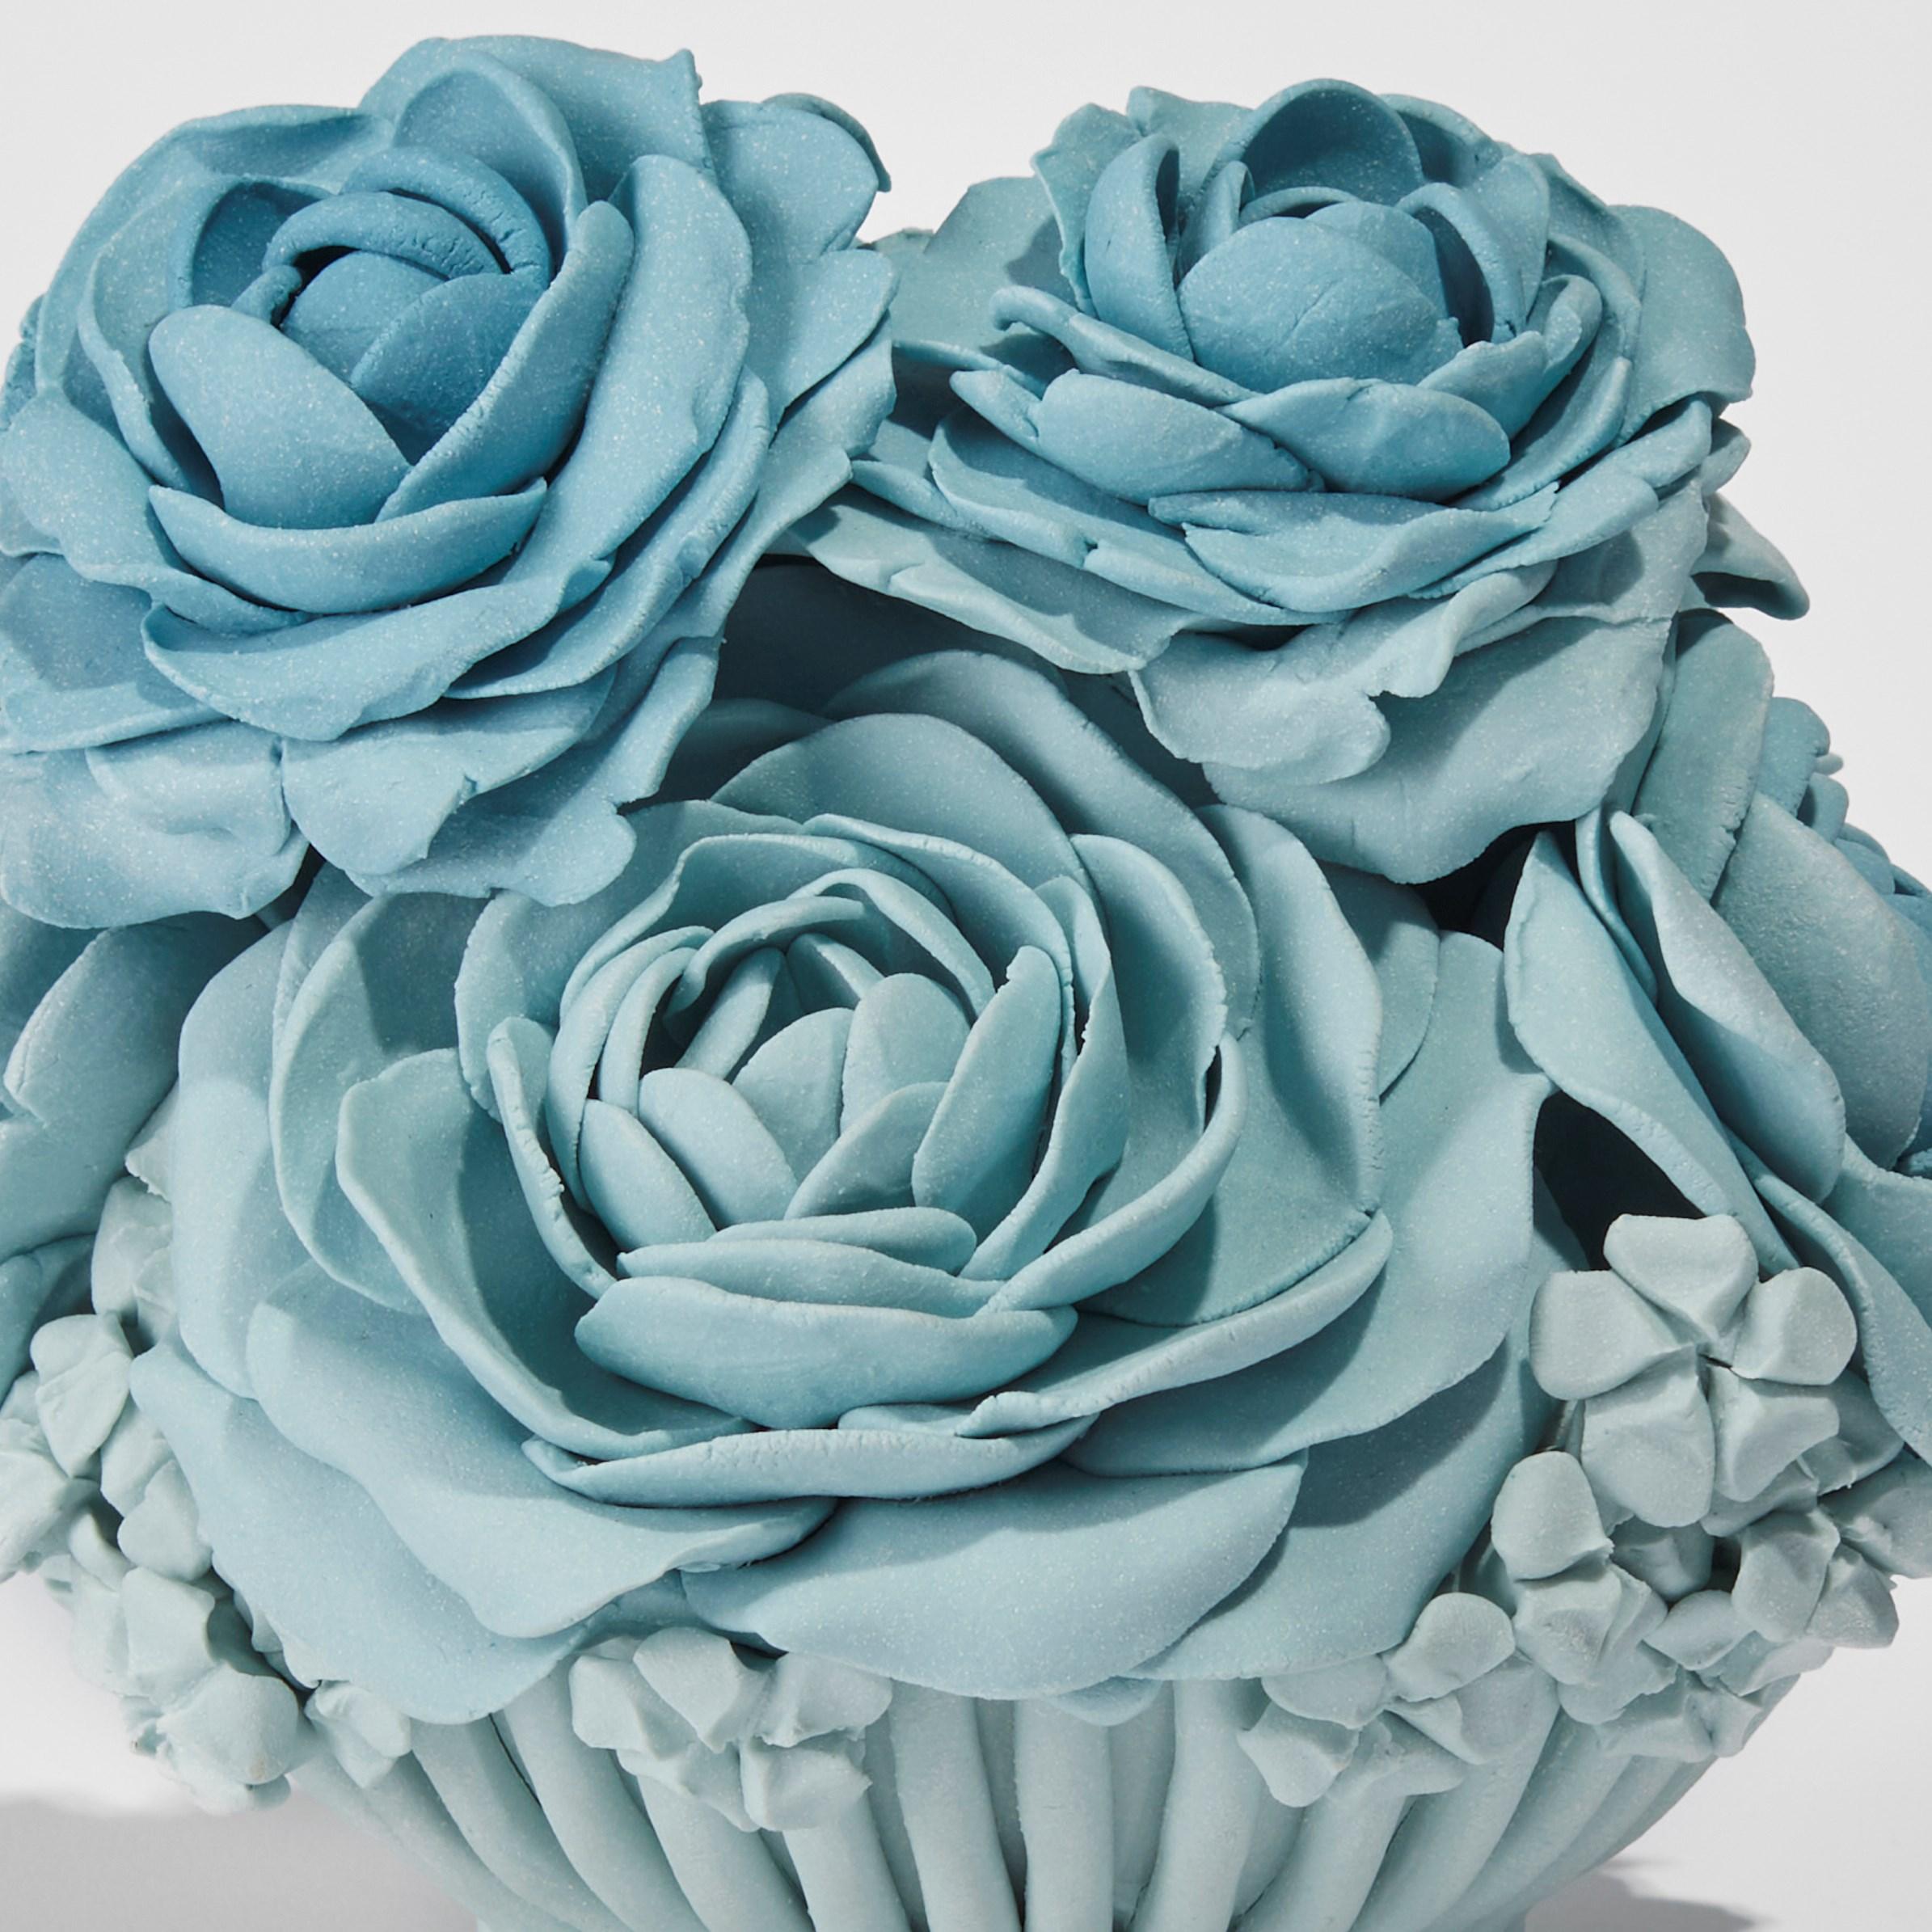 Hand-Crafted Joyce, a Pastel Blue Porcelain Floral Sculptural Centrepiece by Vanessa Hogge